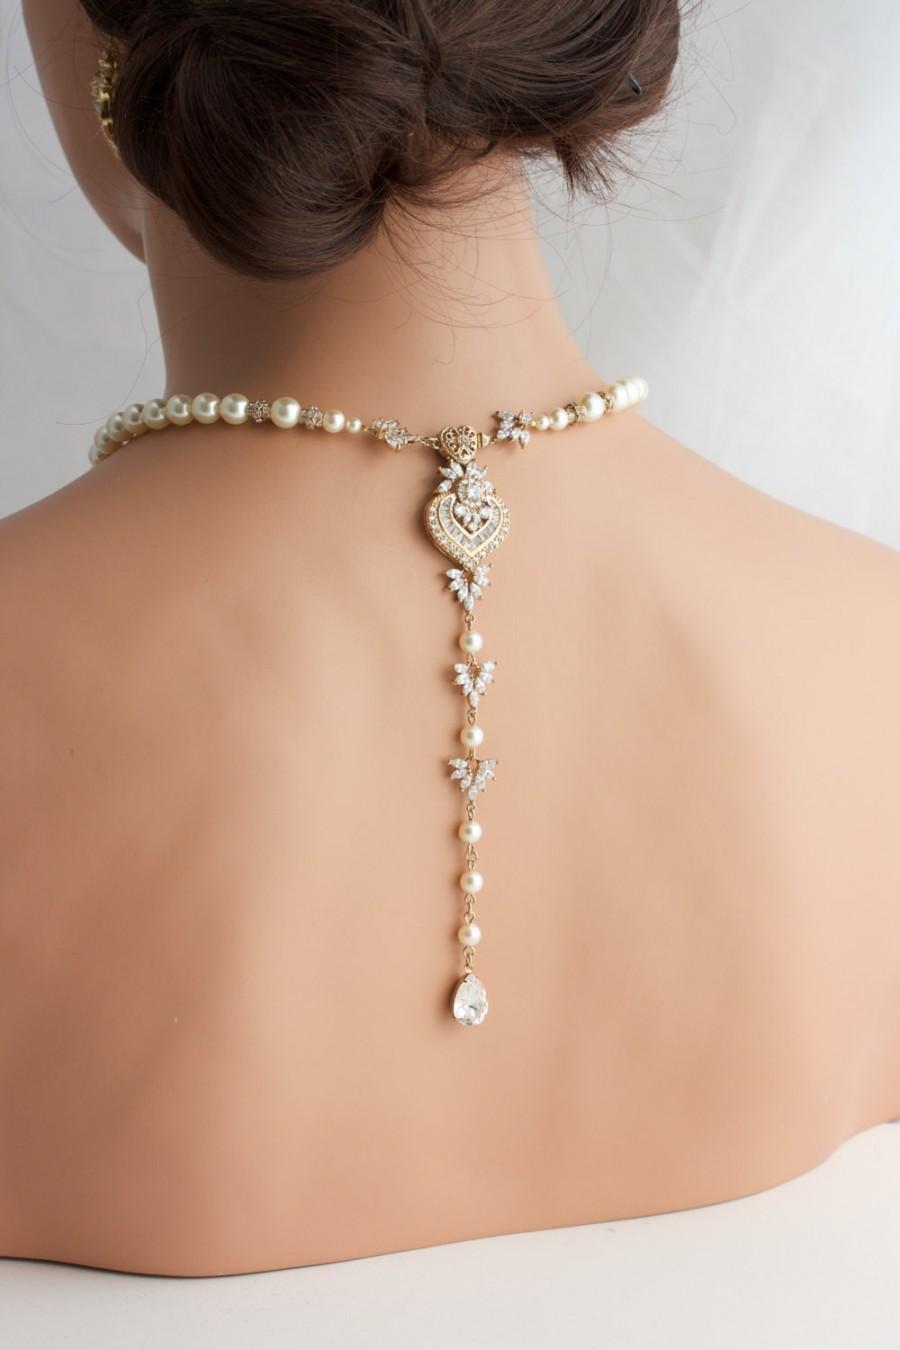 Wedding - Wedding Jewelry Gold Backdrop Necklace Long Back Drop Bridal Necklace Pearl Crystal Wedding Necklace EVIE